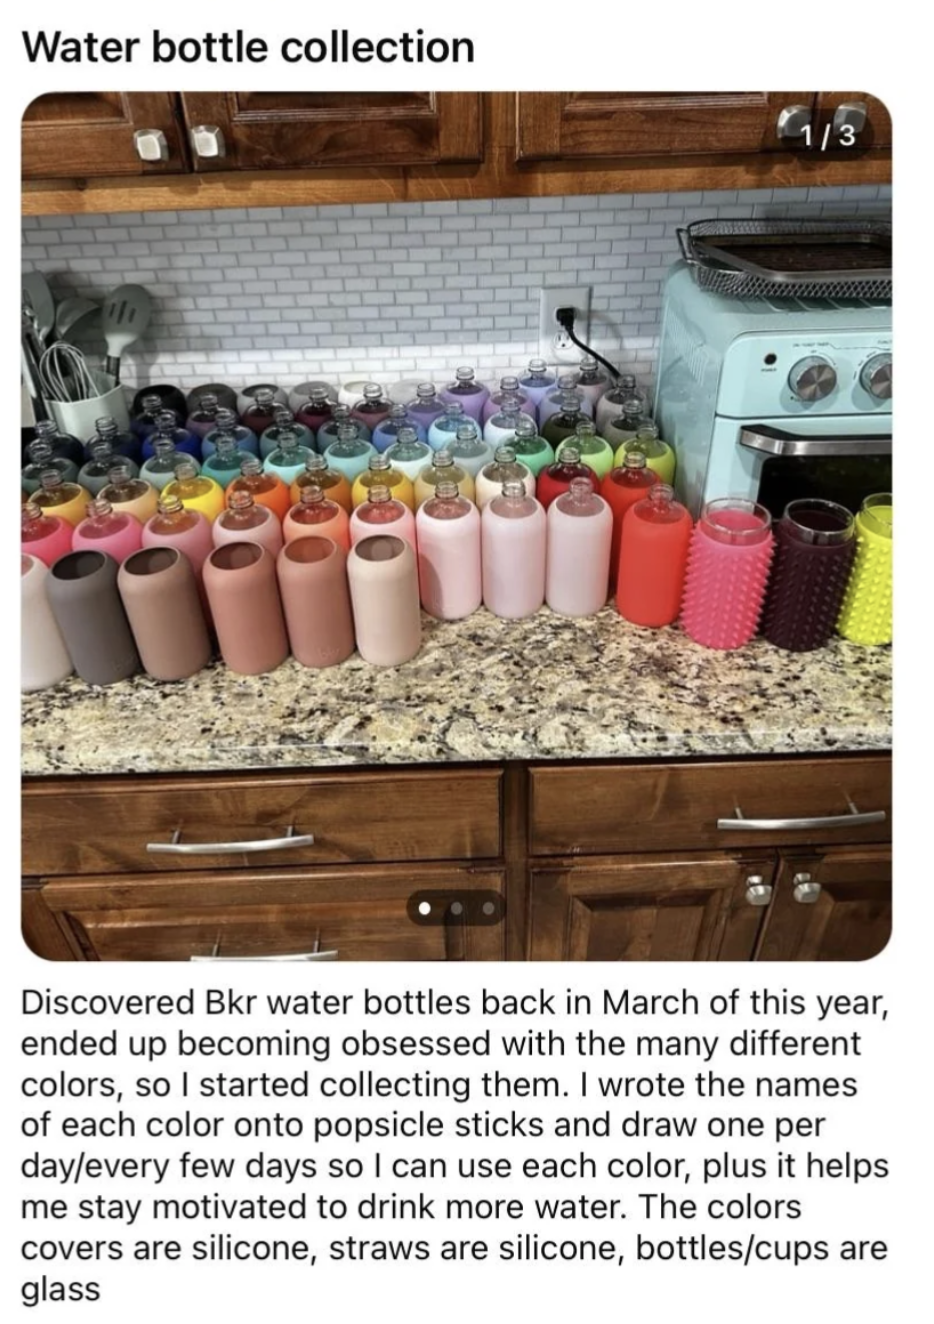 A kitchen counter with an array of water bottles with silicone covers in different colors: &quot;Discovered Bkr water bottles back in March, ended up becoming obsessed with the many different colors, so I started collecting them&quot;